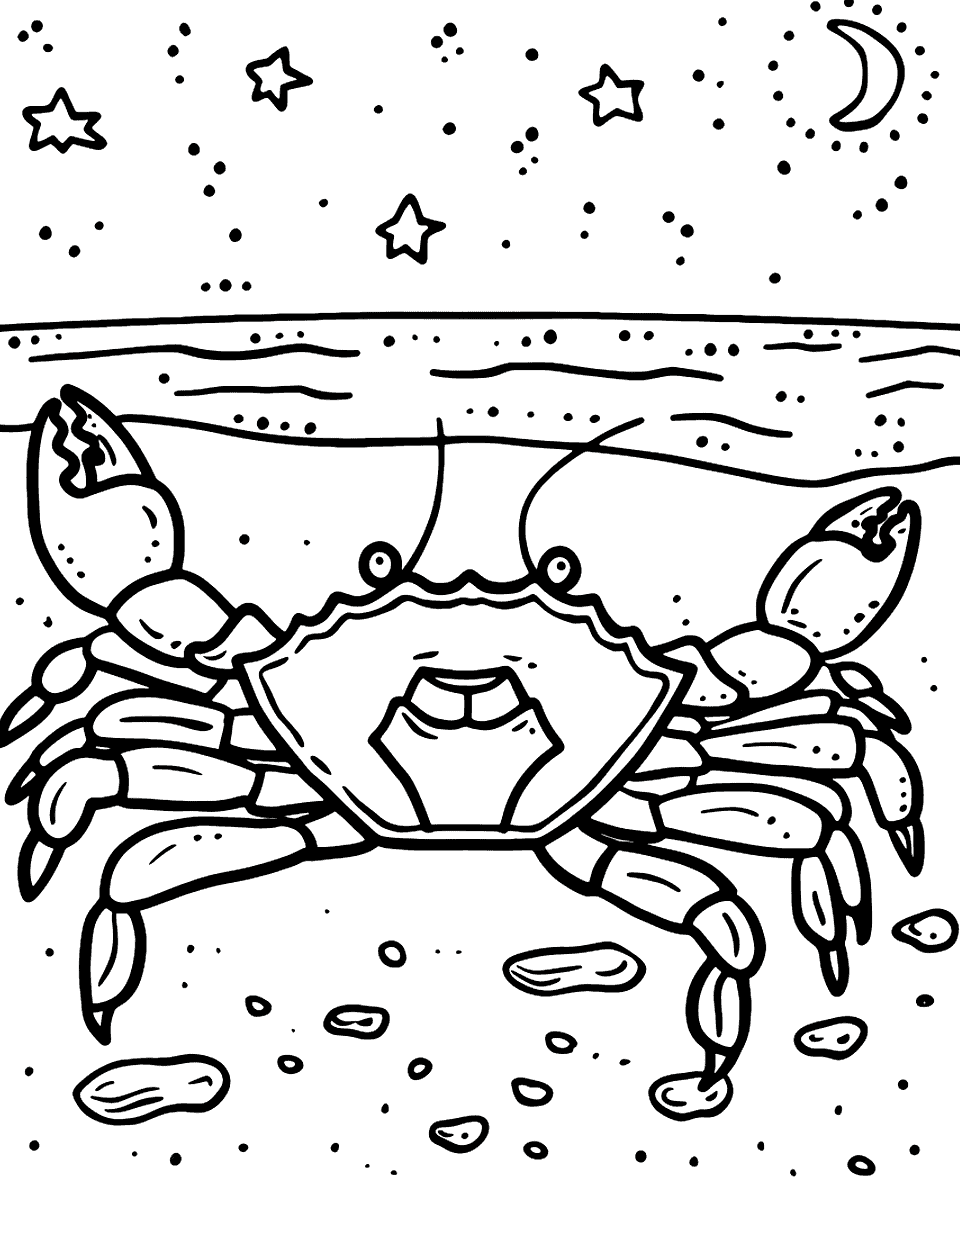 Starry Night Crab Coloring Page - A crab on the beach under a star-filled sky.